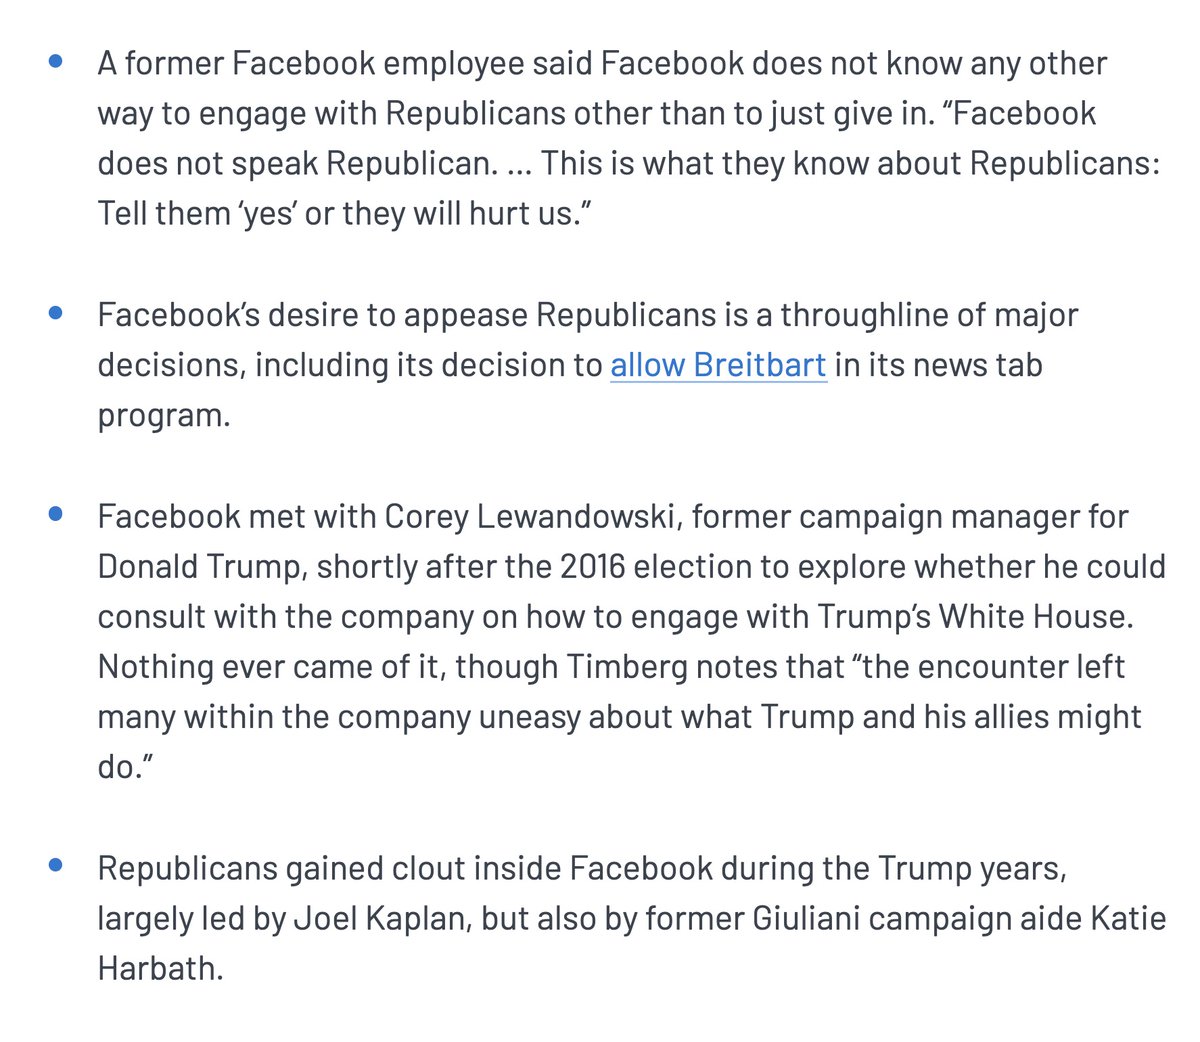 Earlier this year, we learned about a whole host of systematic ways that Facebook favors conservatives. https://www.mediamatters.org/facebook/new-report-shows-12-ways-facebook-favors-conservatives